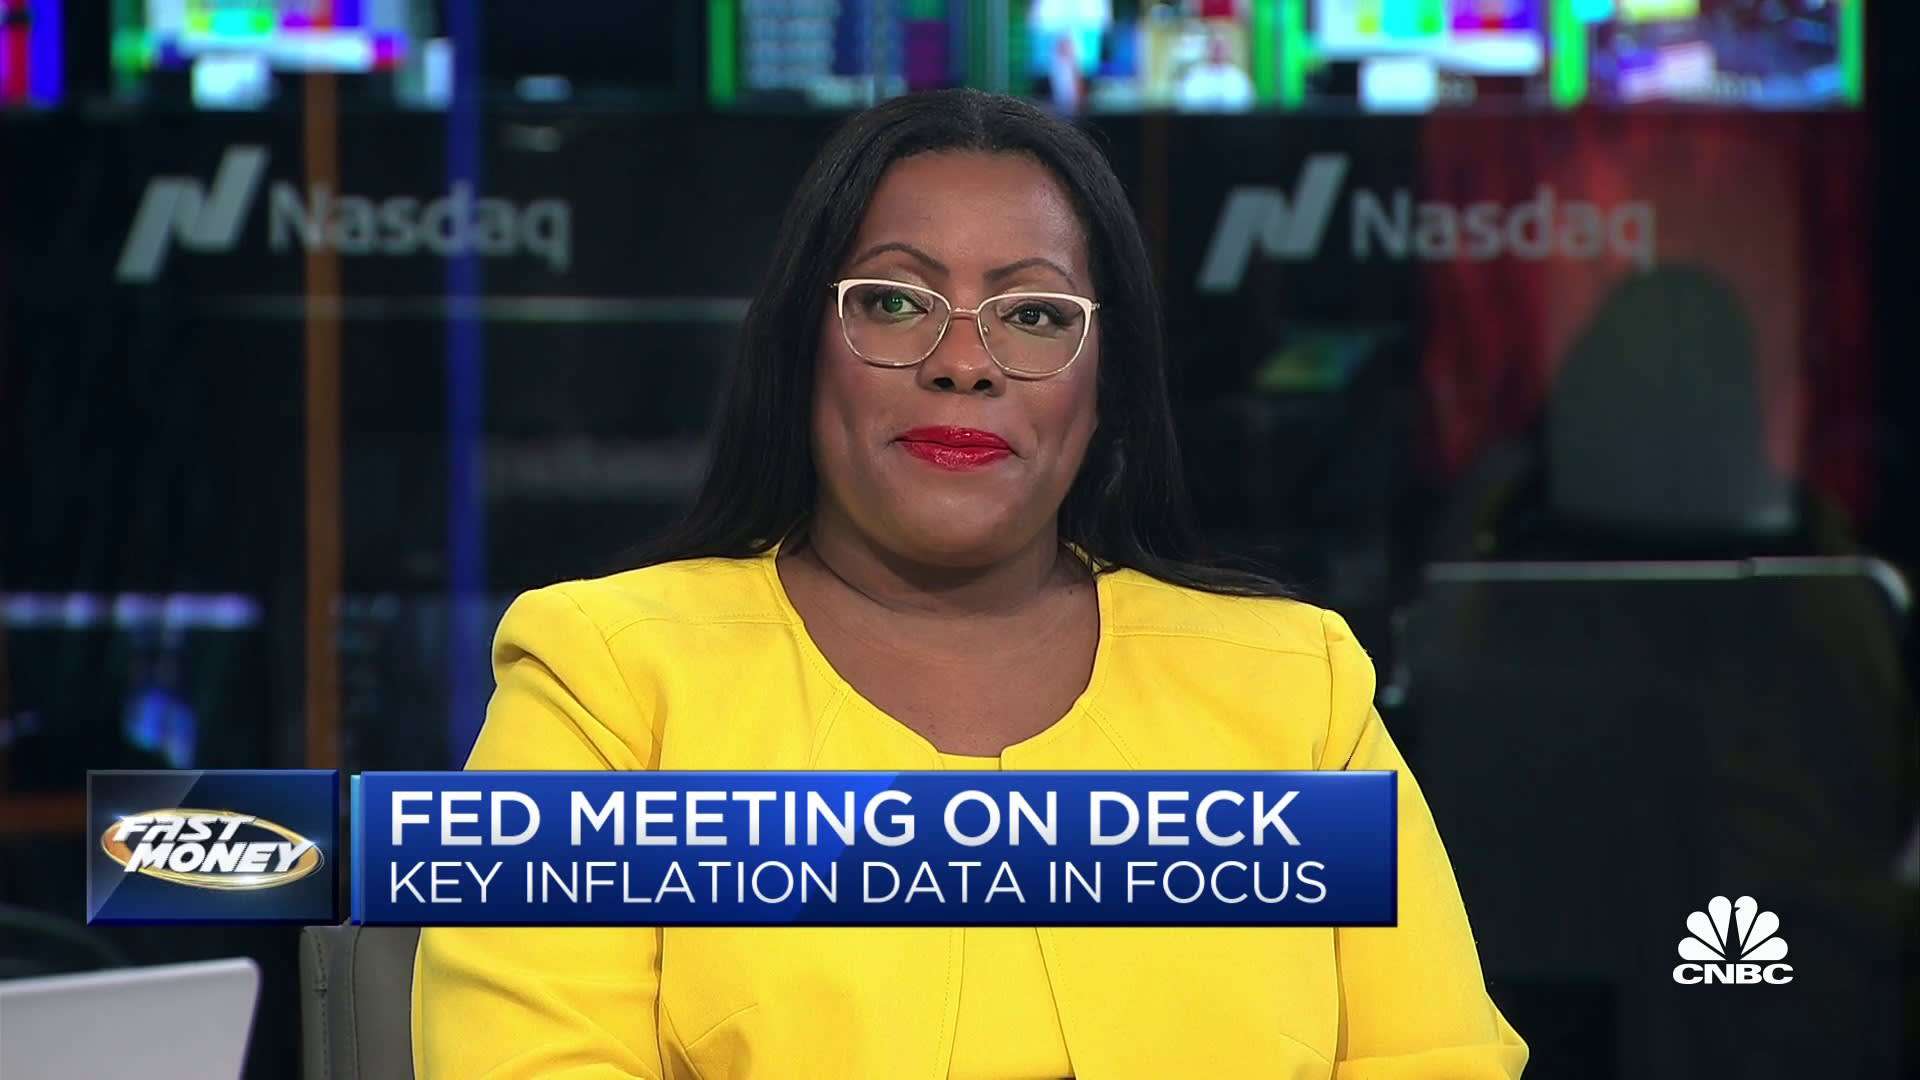 'We are expecting a pause' from the Fed next week, says Conference Board's Dana Peterson